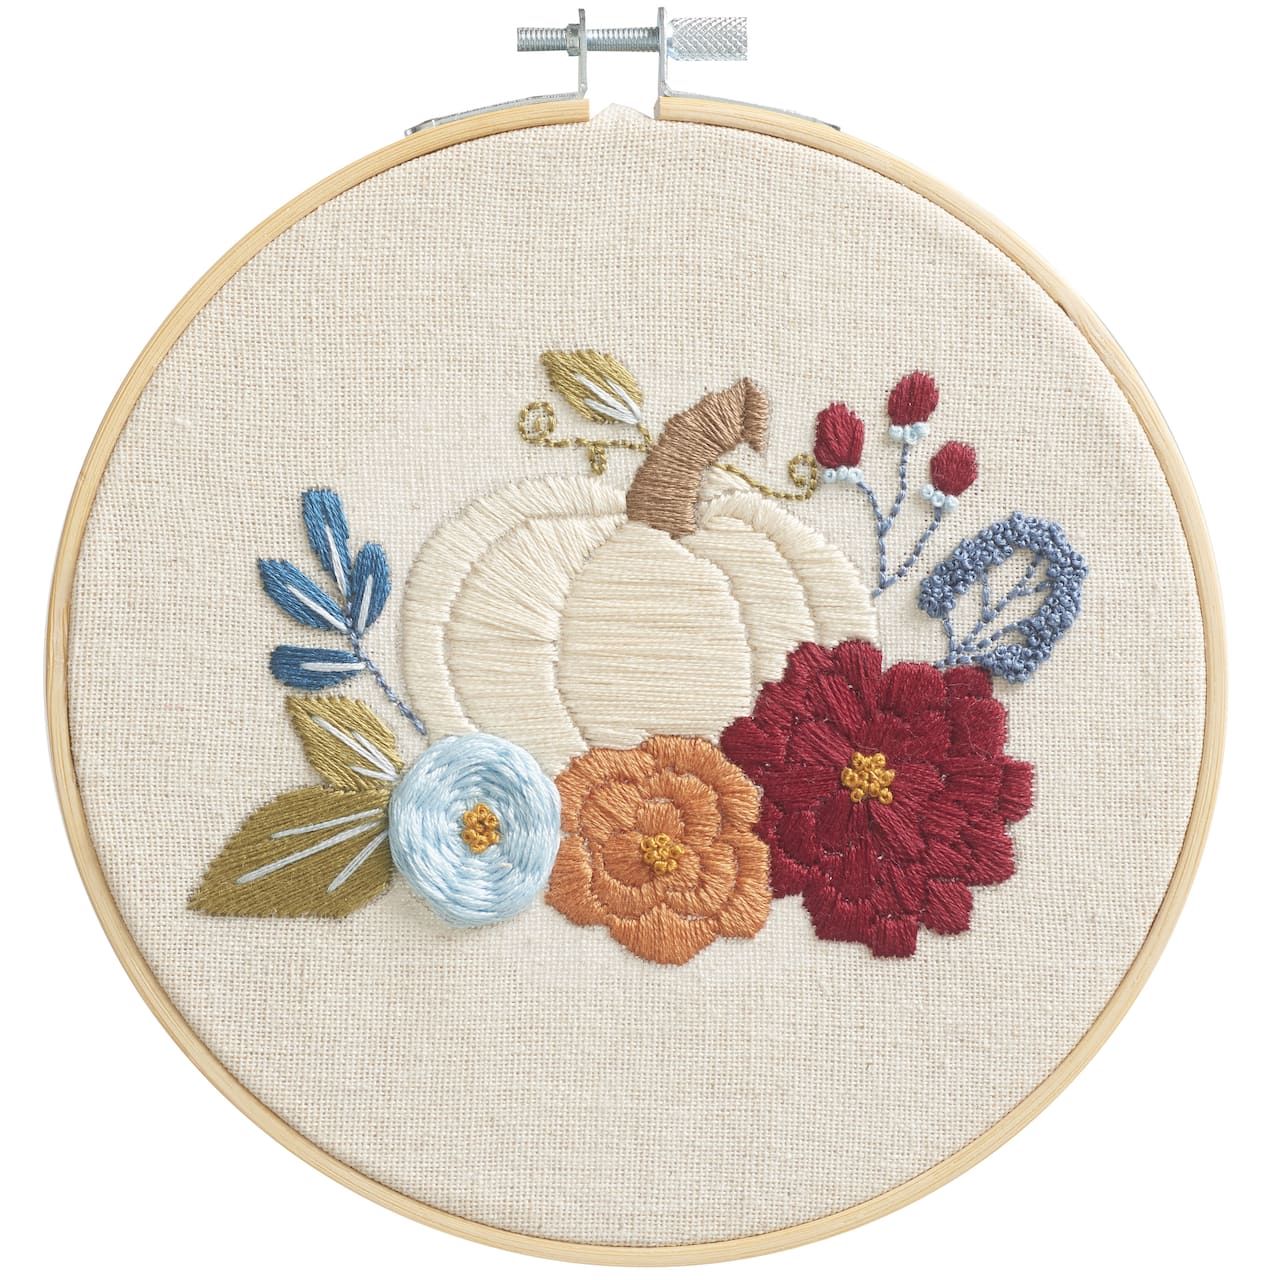 6 Pumpkin & Floral Stamped Design Embroidery Kit by Loops